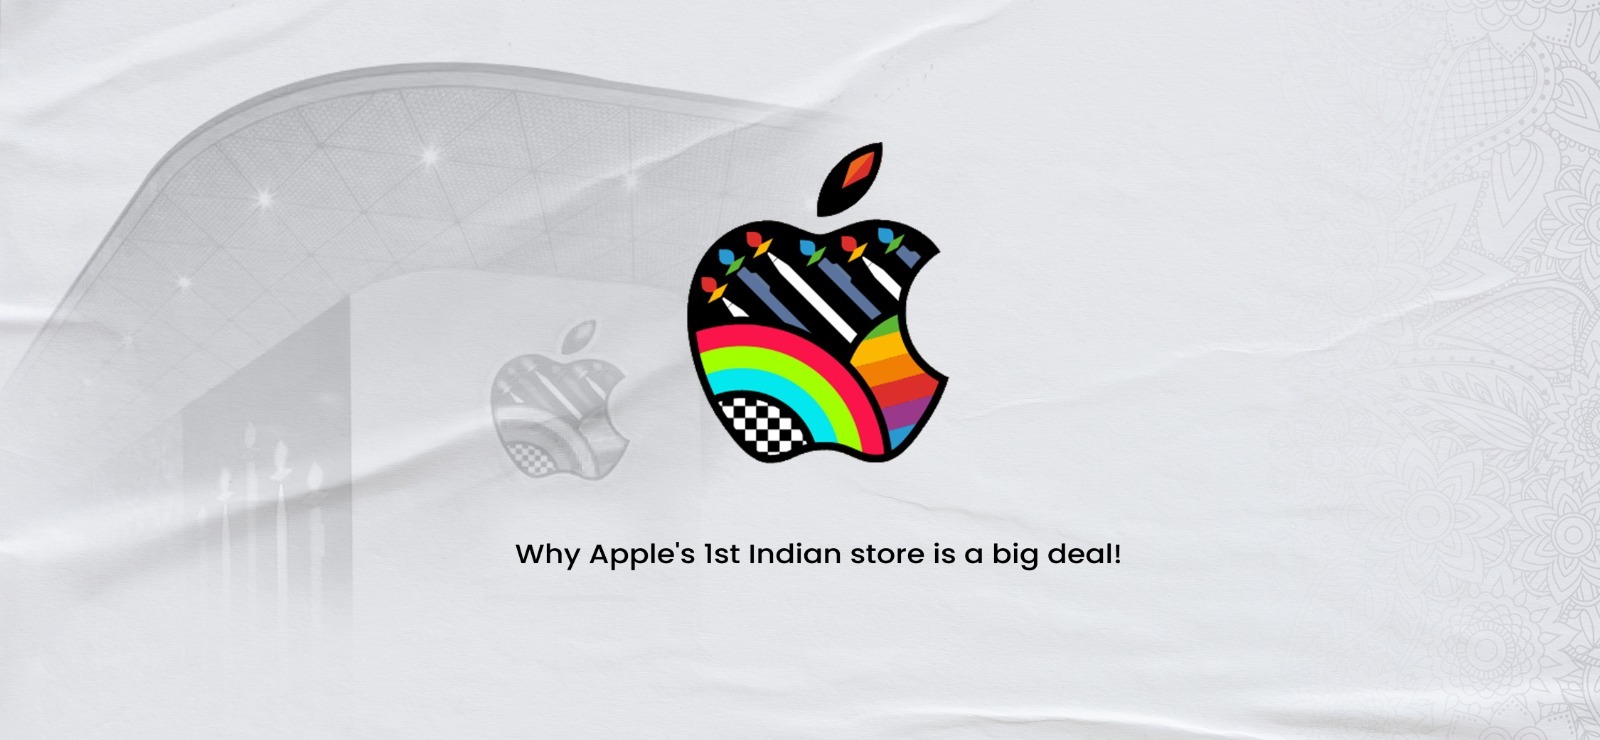 Why is India’s First Apple Store a Big Deal for Apple and the Indian Market?